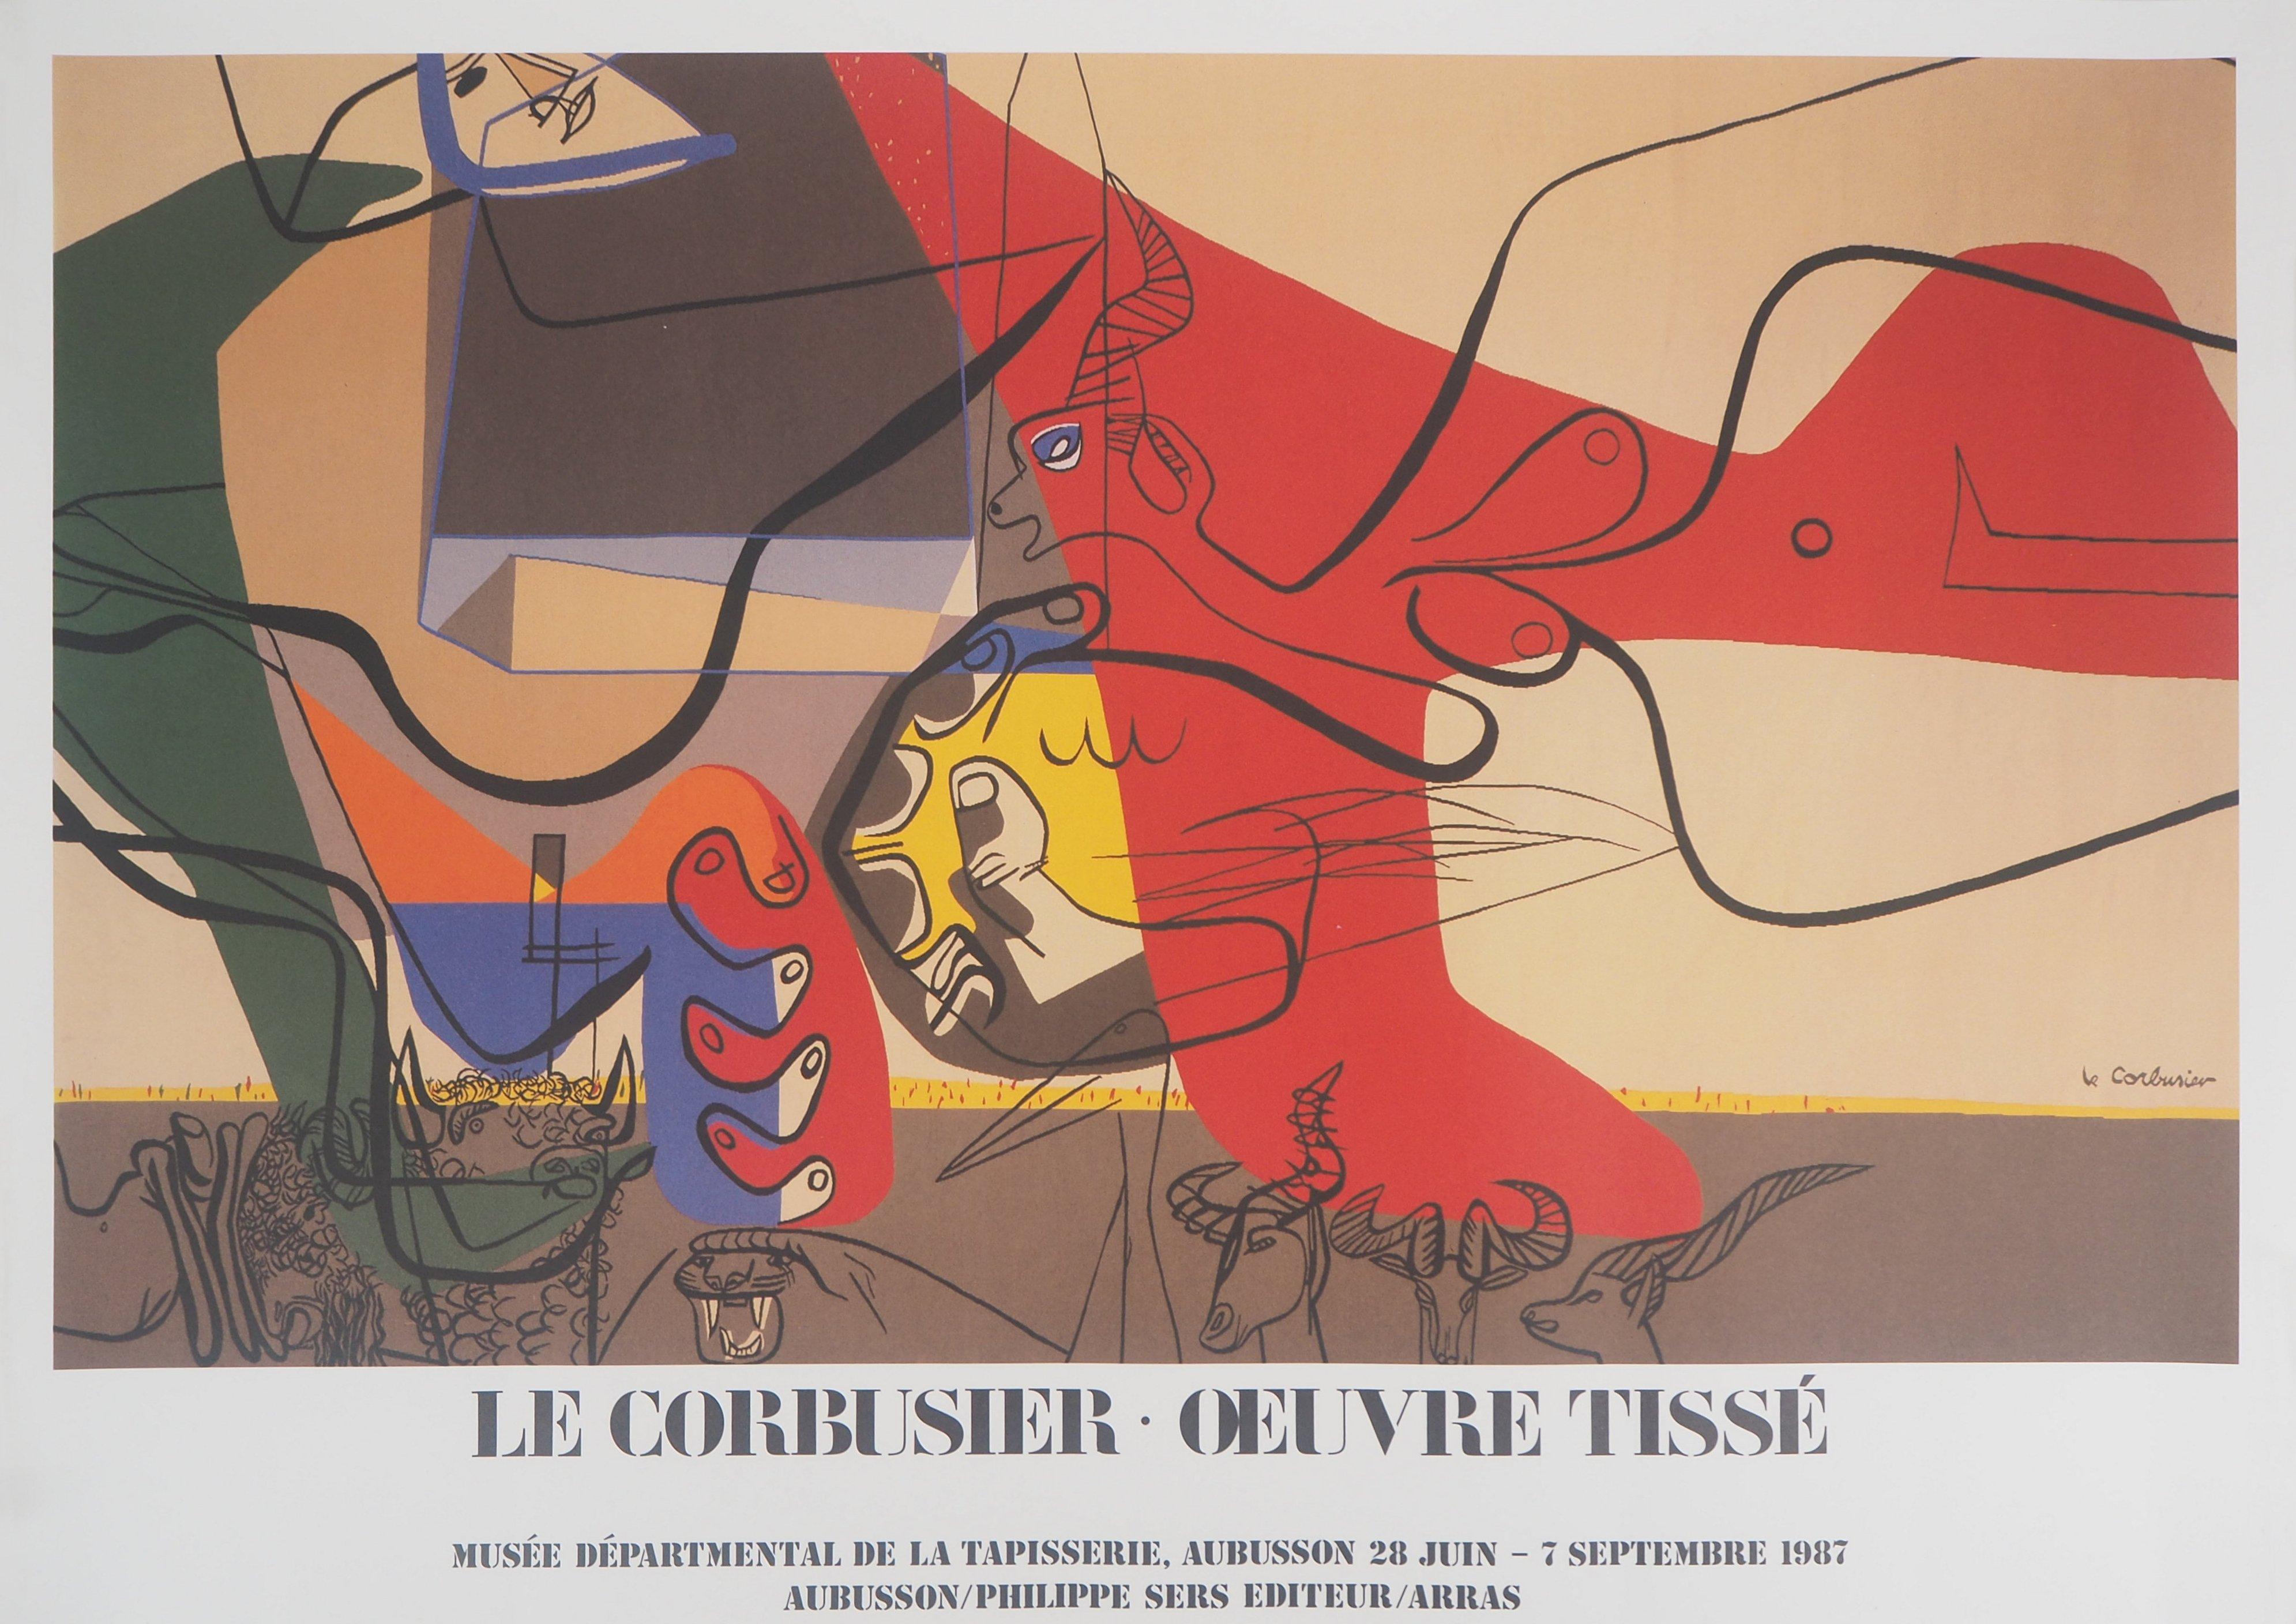 Le Corbusier (after) Figurative Print - Presence (Man with Bull and Animals) - Original vintage poster, 1987